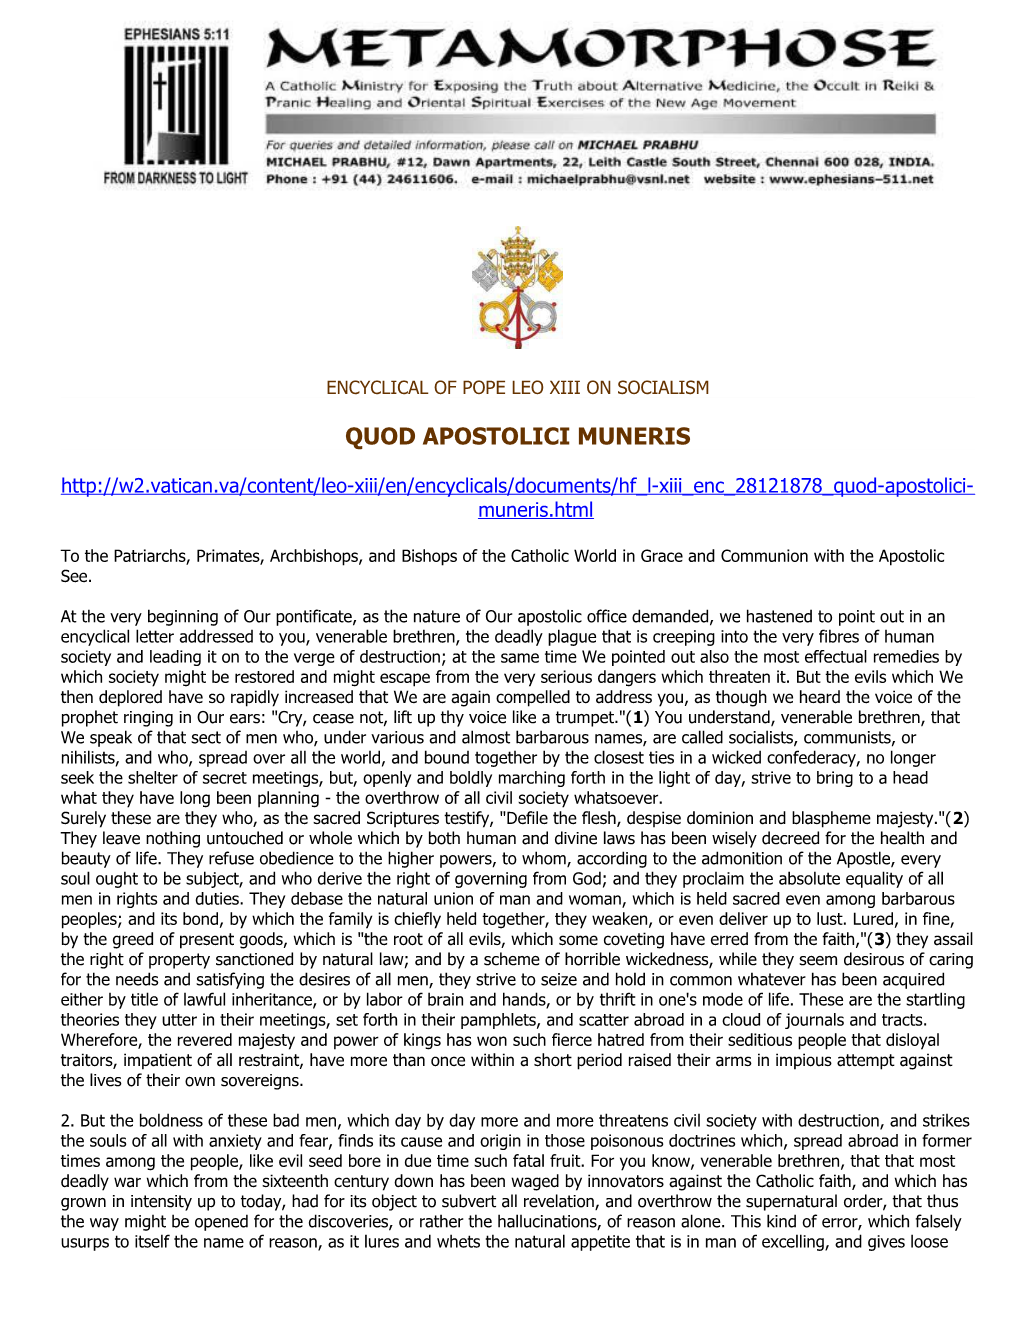 Encyclical of Pope Leo Xiii on Socialism